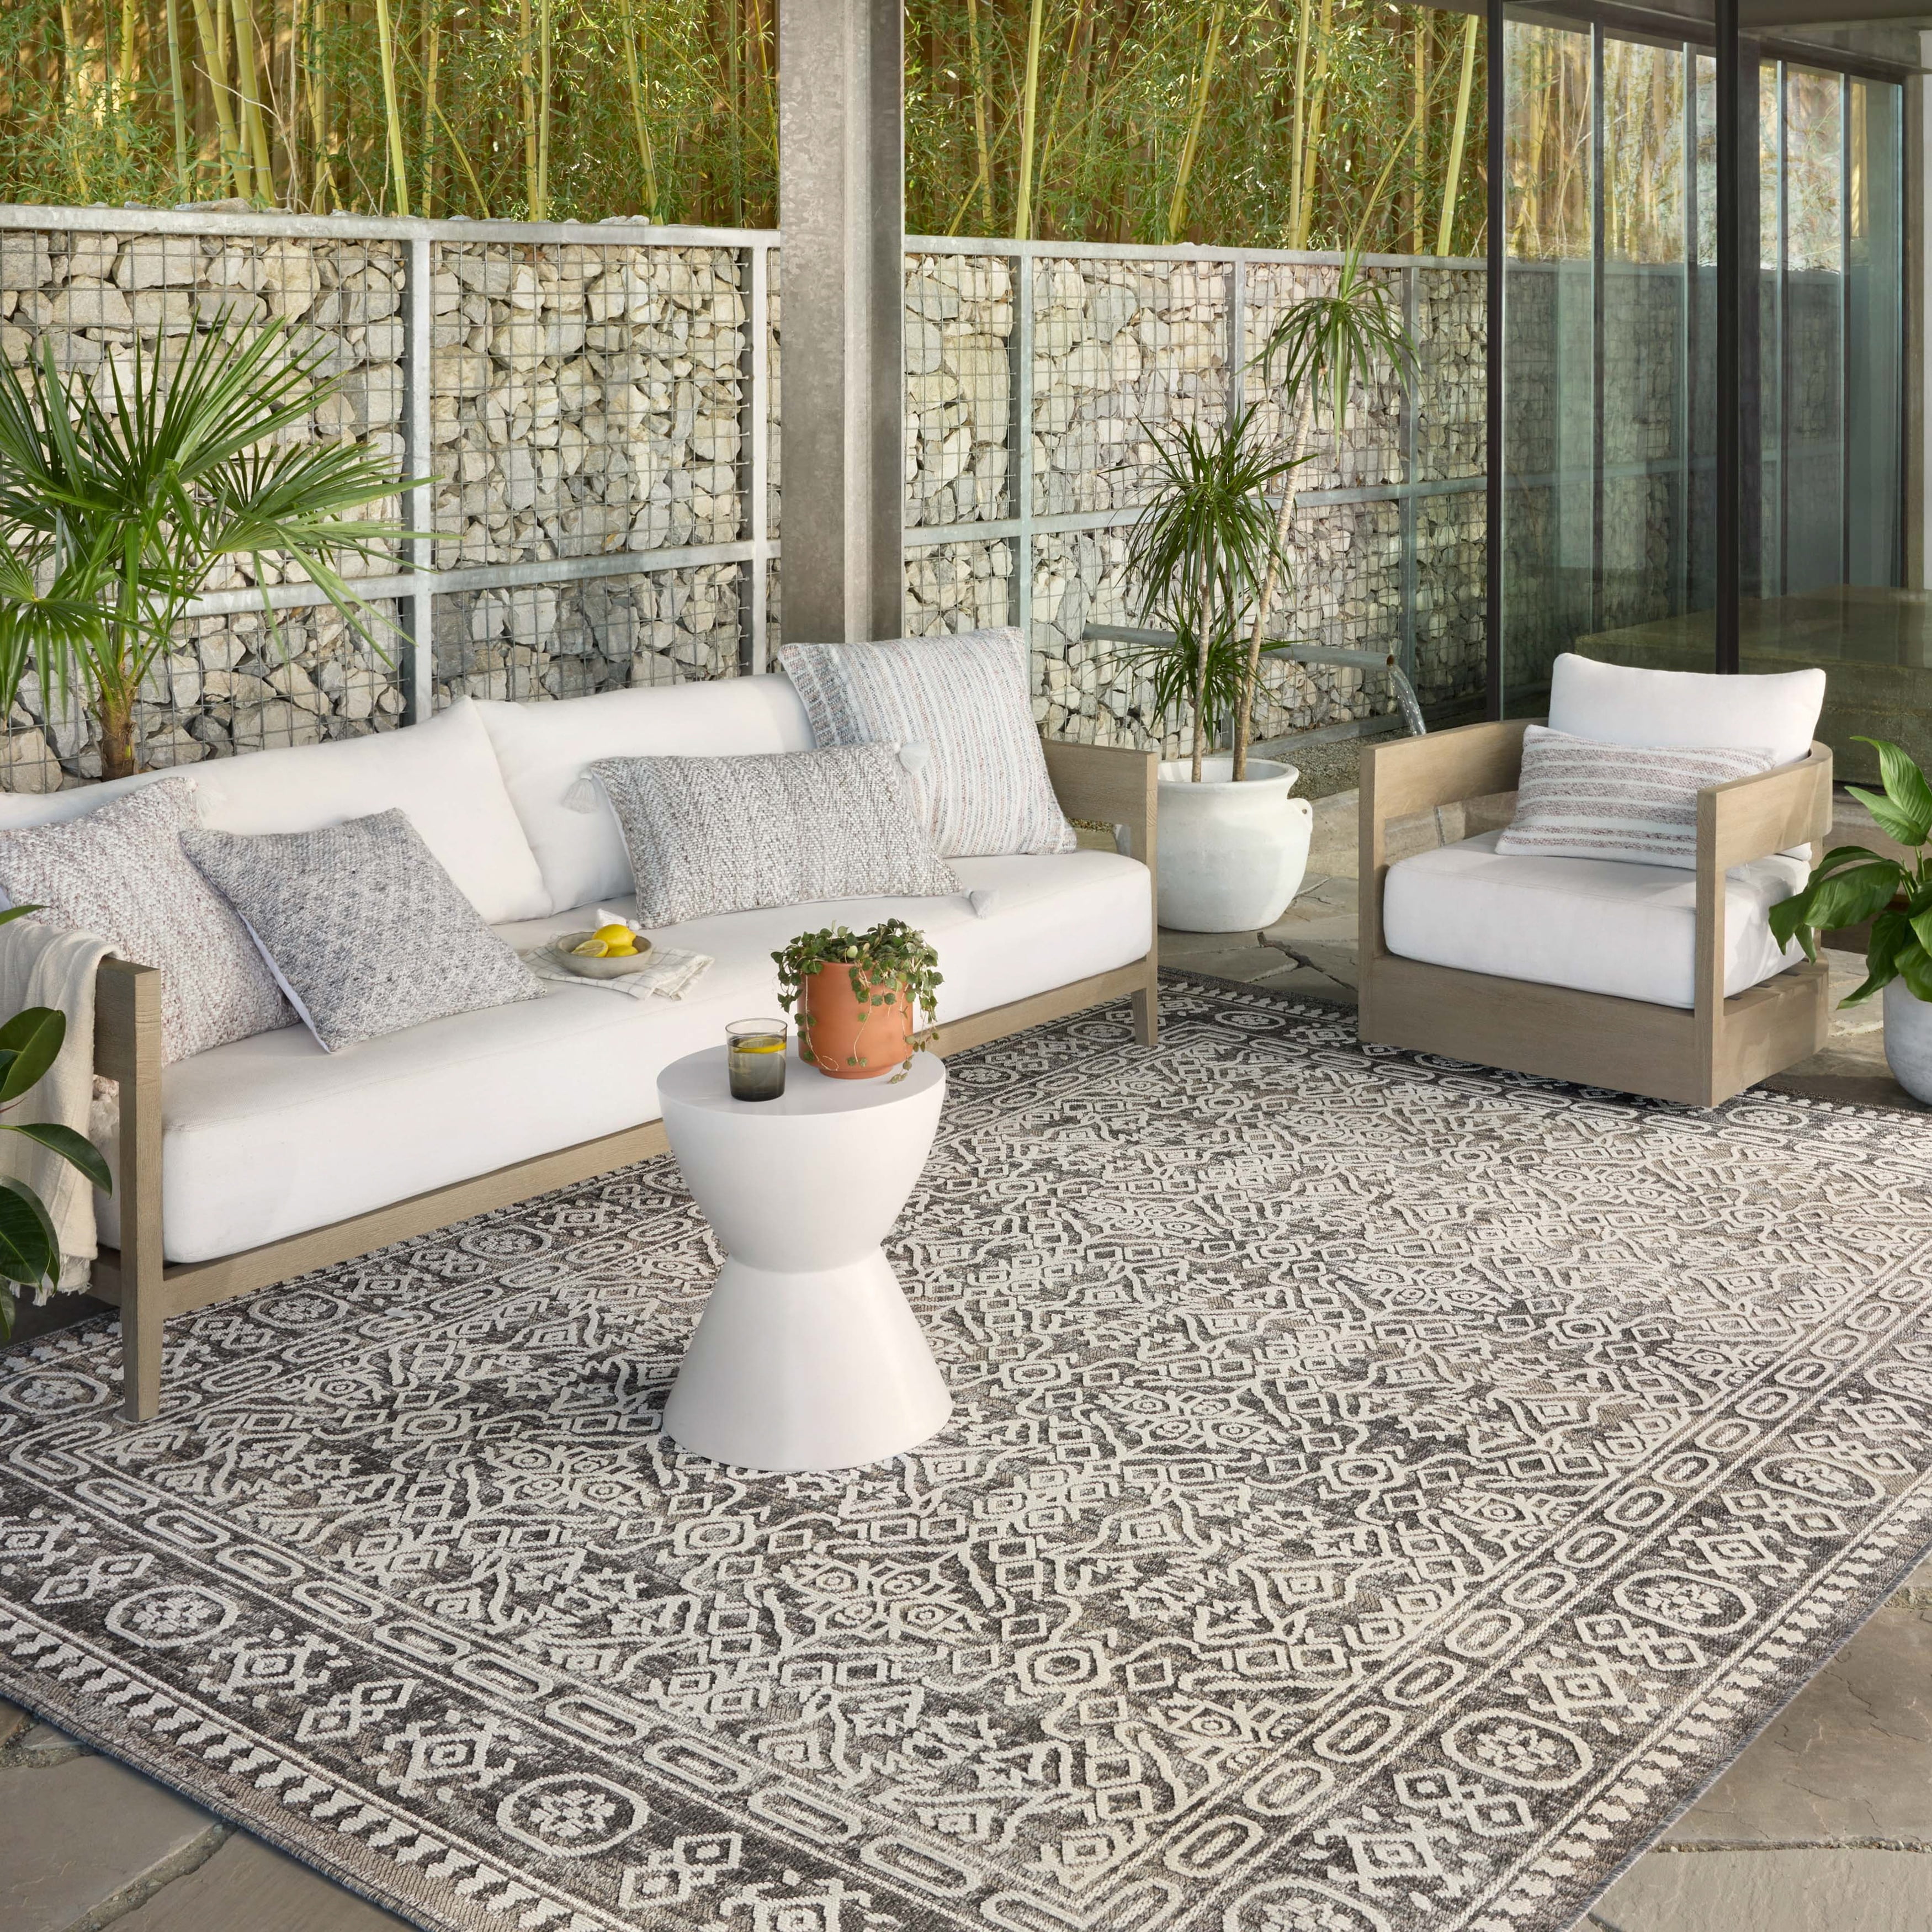 Outdoor Carpet: Affordable Solutions with Indoor-Outdoor Rugs